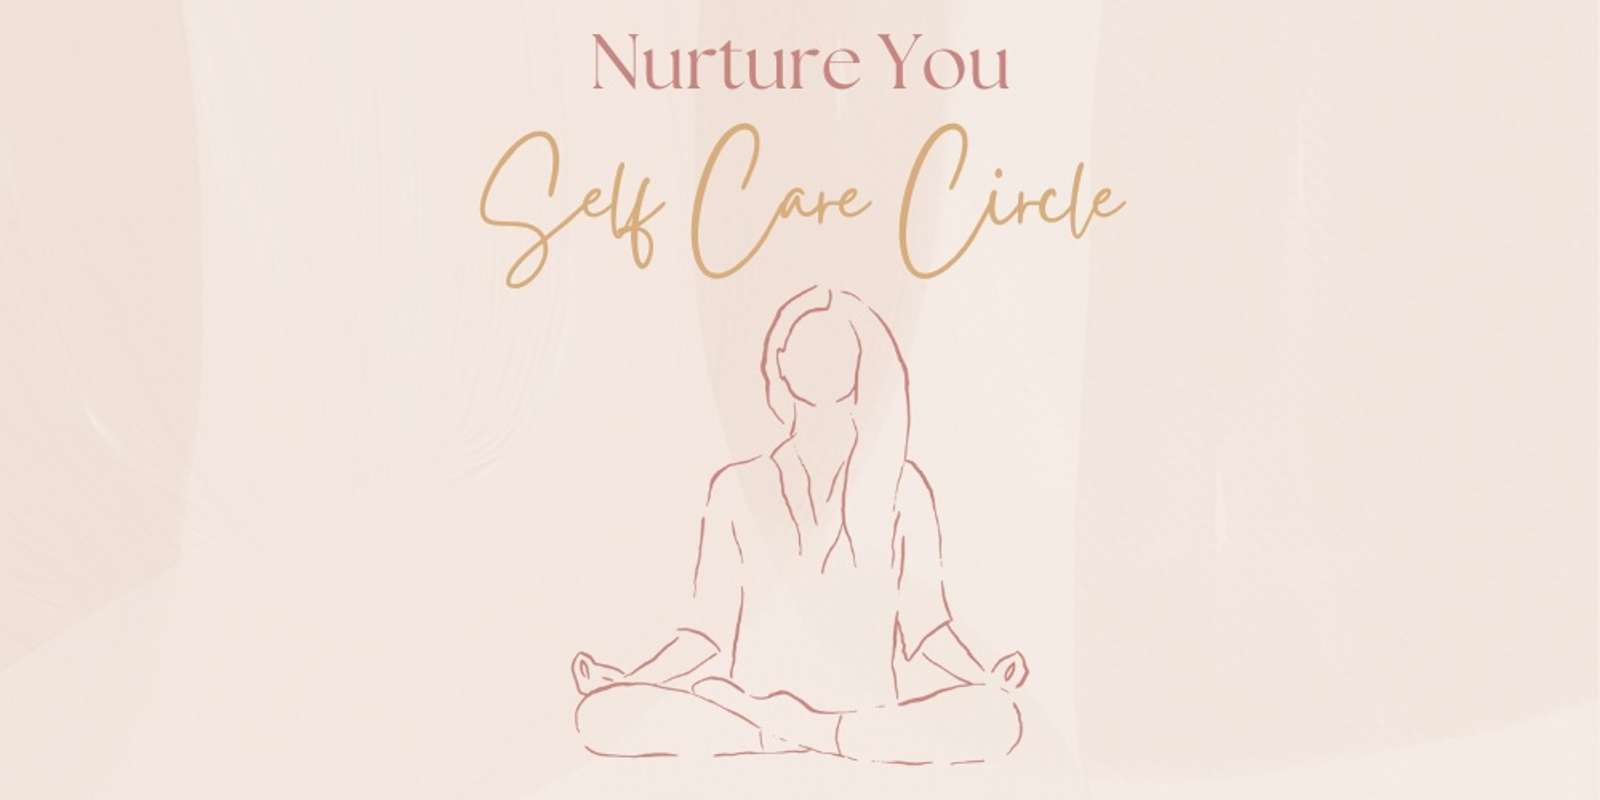 Banner image for Nurture You - Self Care Circle